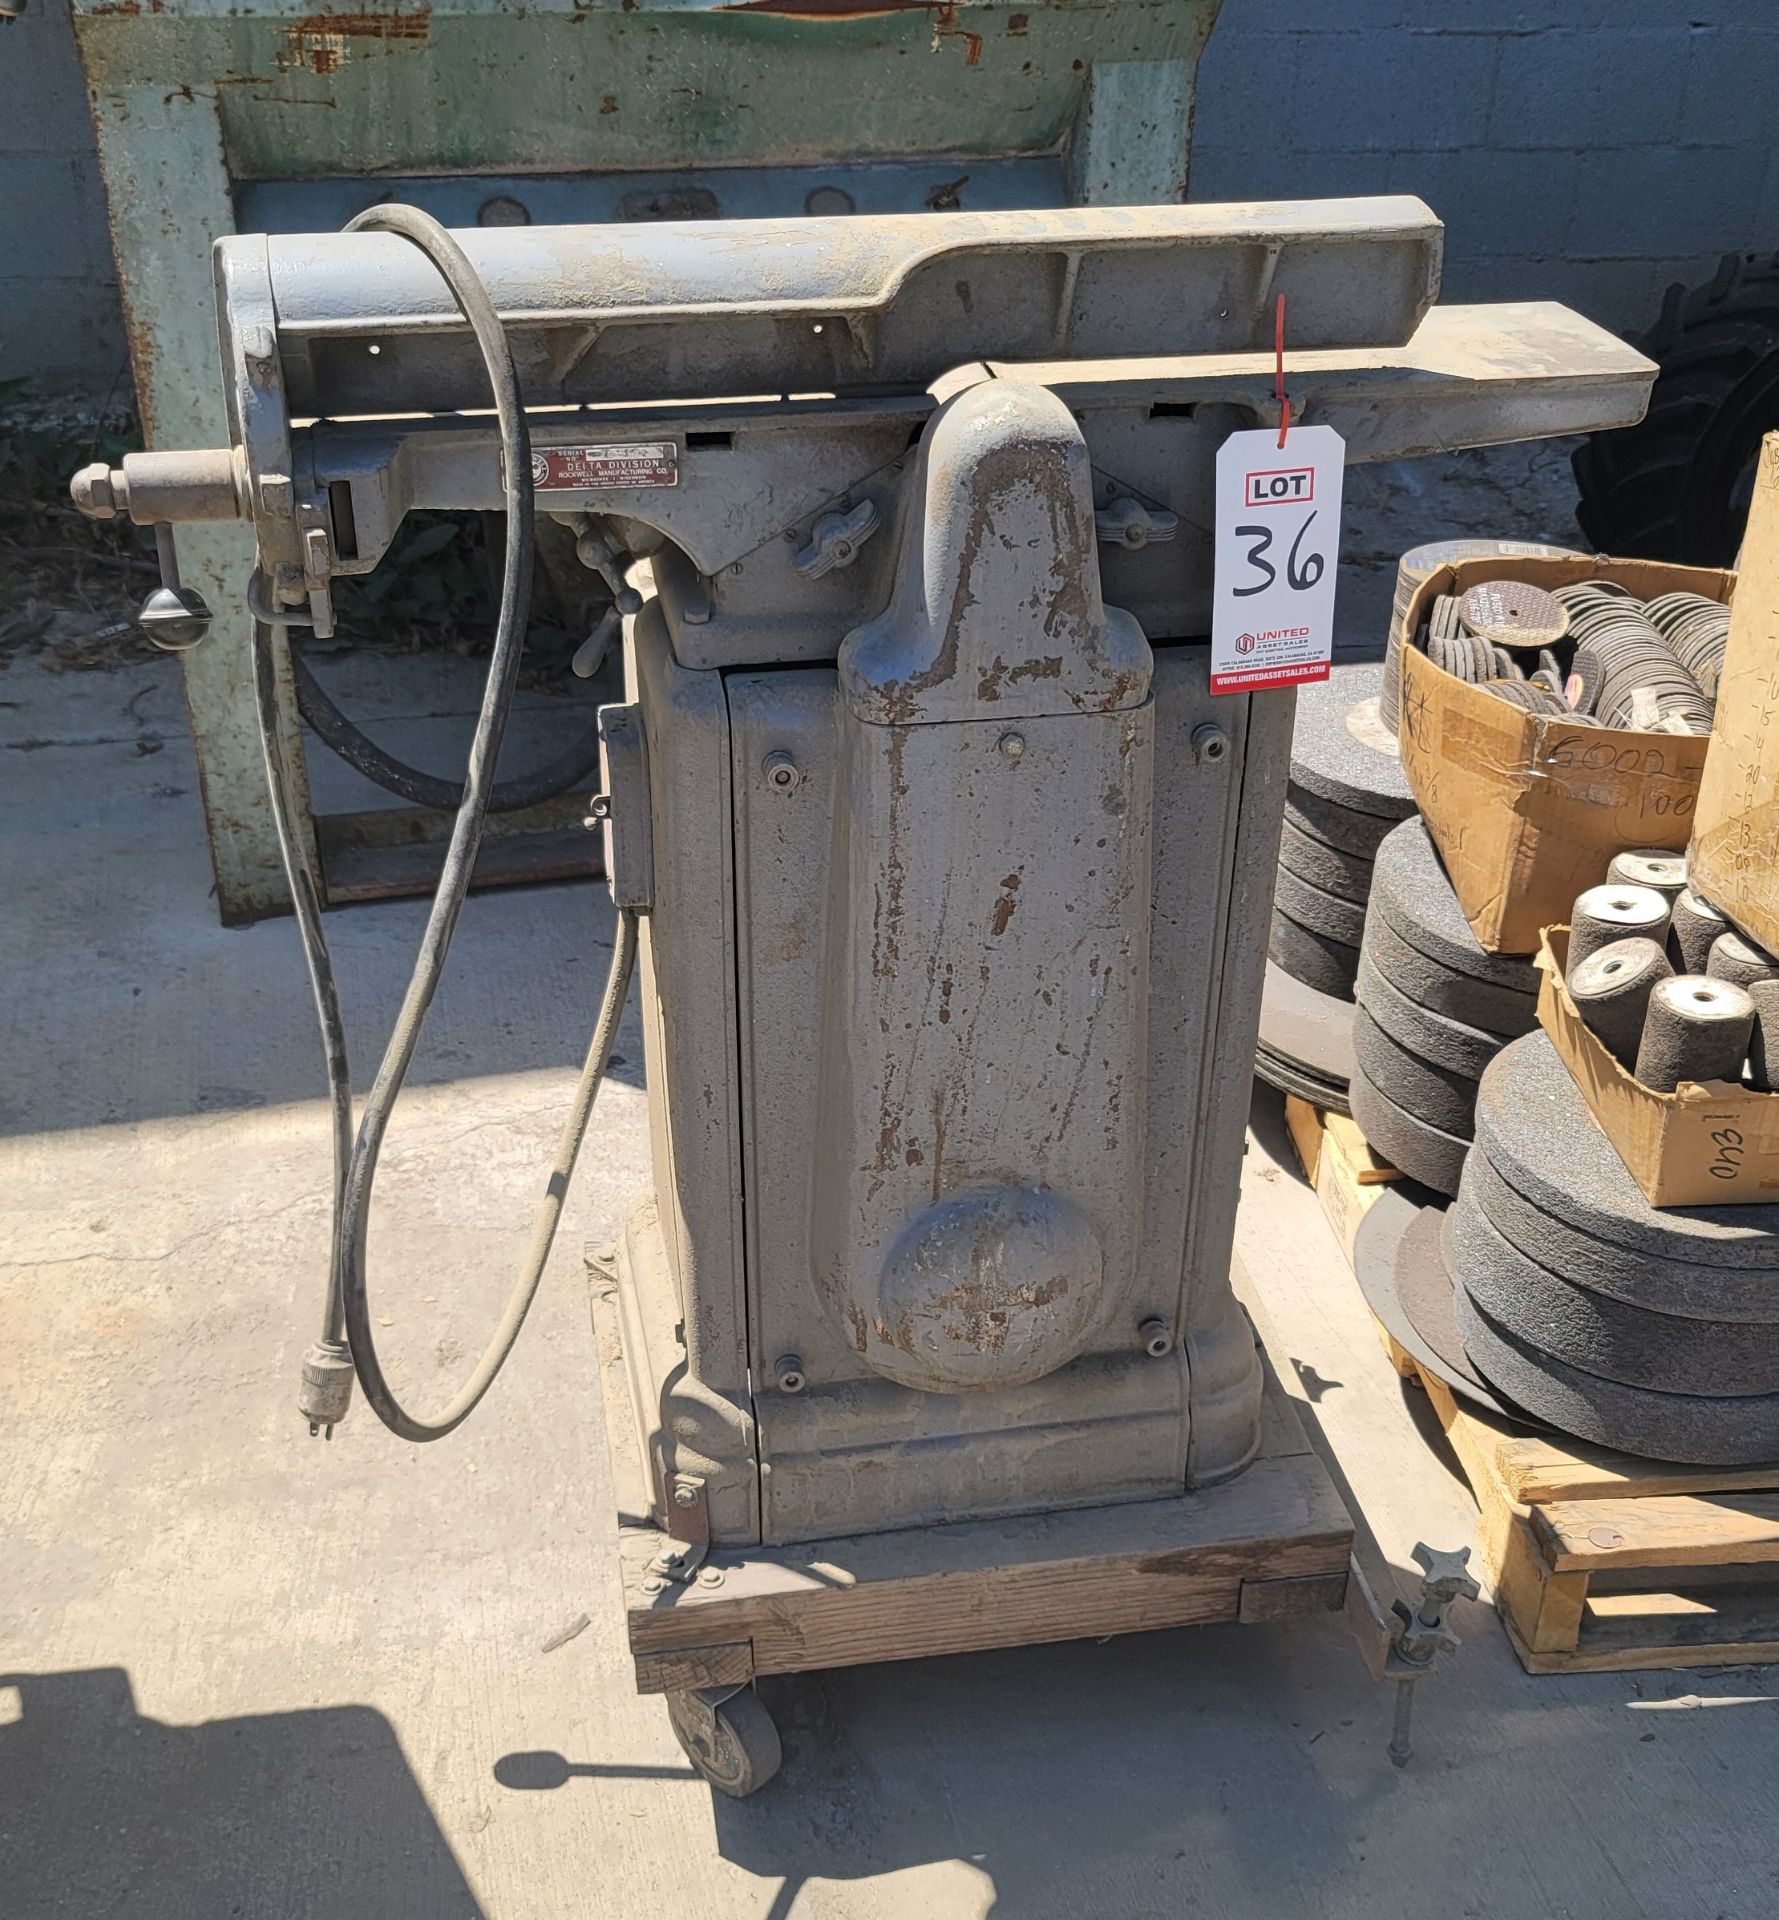 DELTA 6" JOINTER, 32" TABLE LENGTH, S/N 70-1564